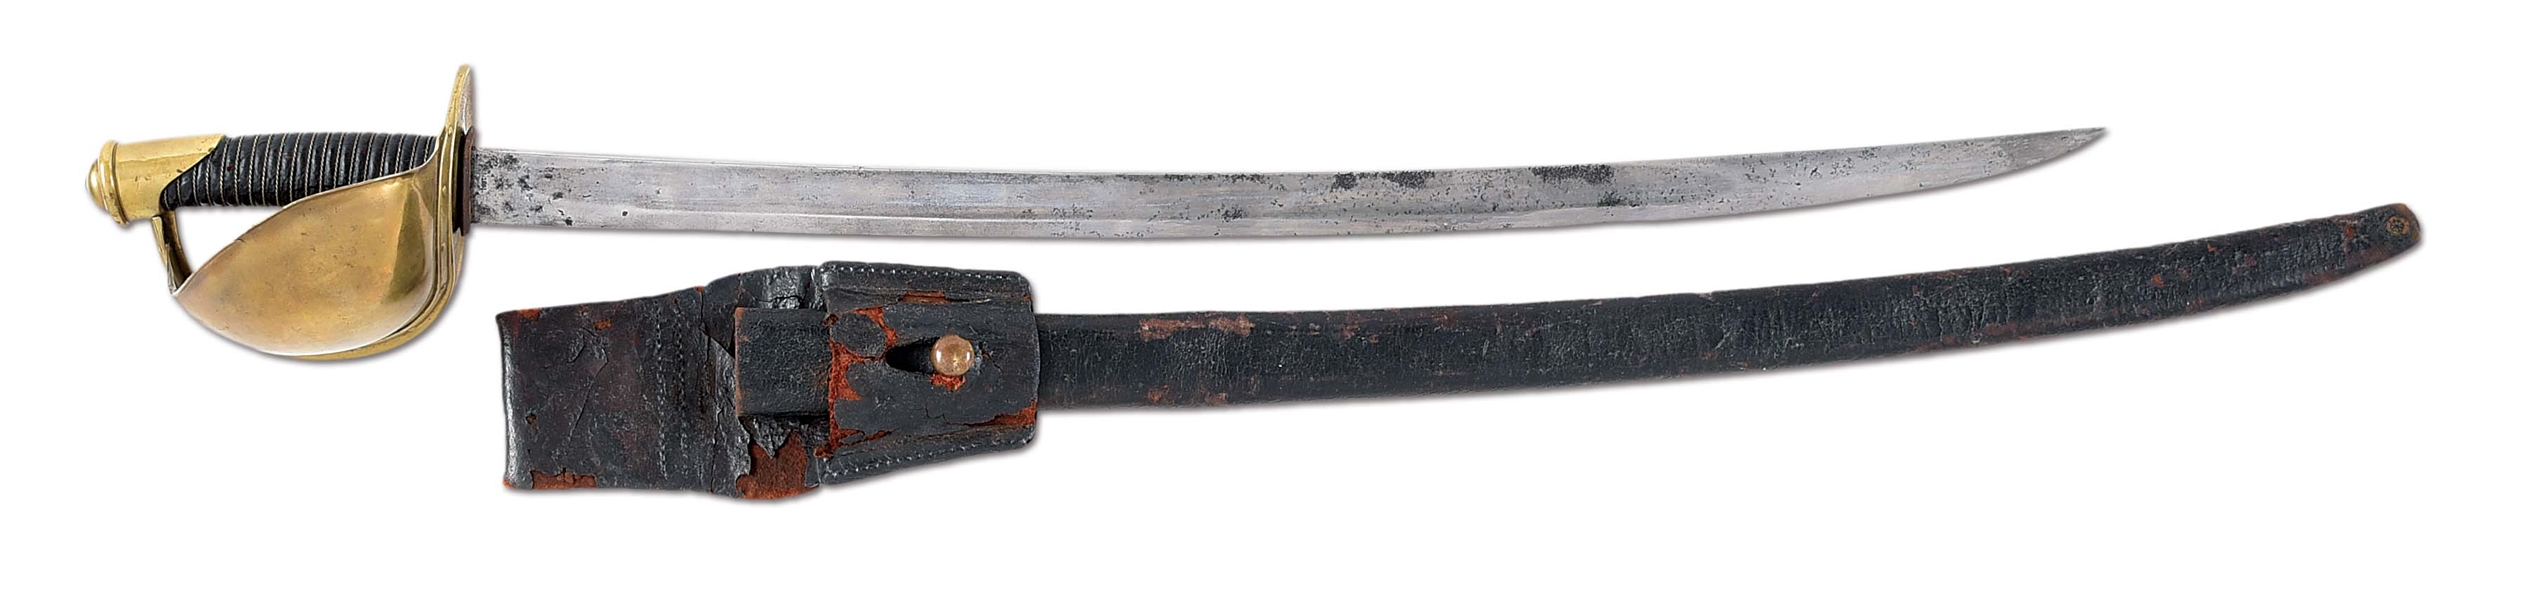 SCARCE 1861 DATED AMES NAVY CUTLASS, SCABBARD, AND FROG